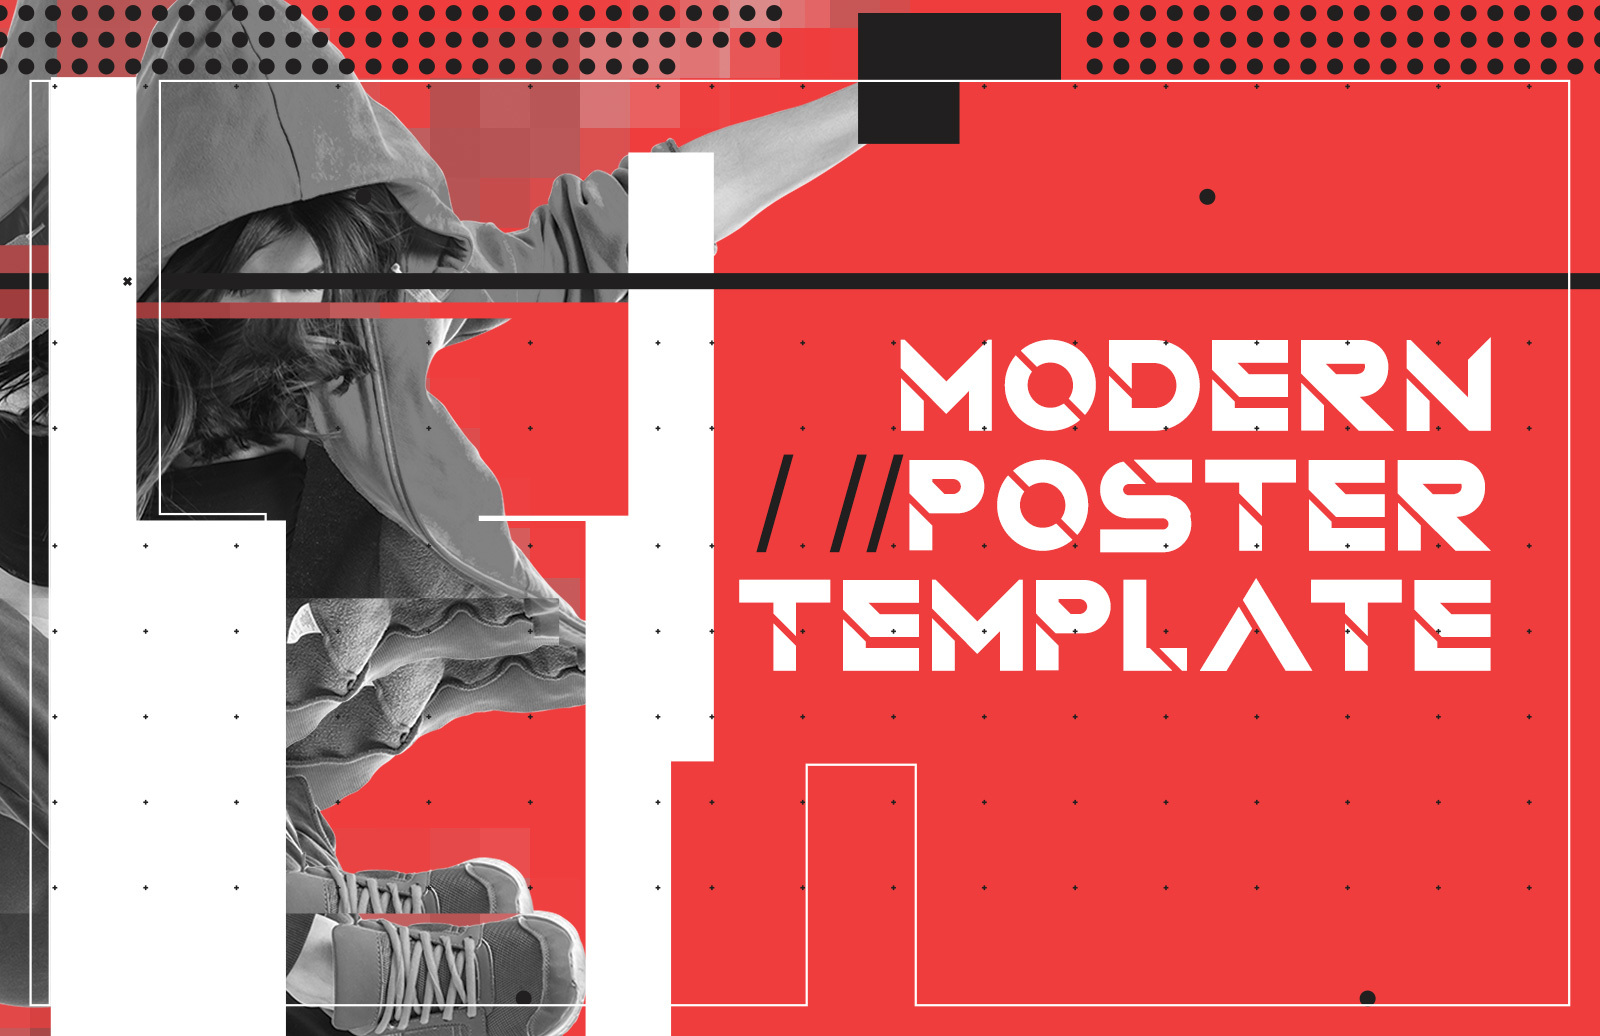  Modern  Style Poster  Template  Medialoot